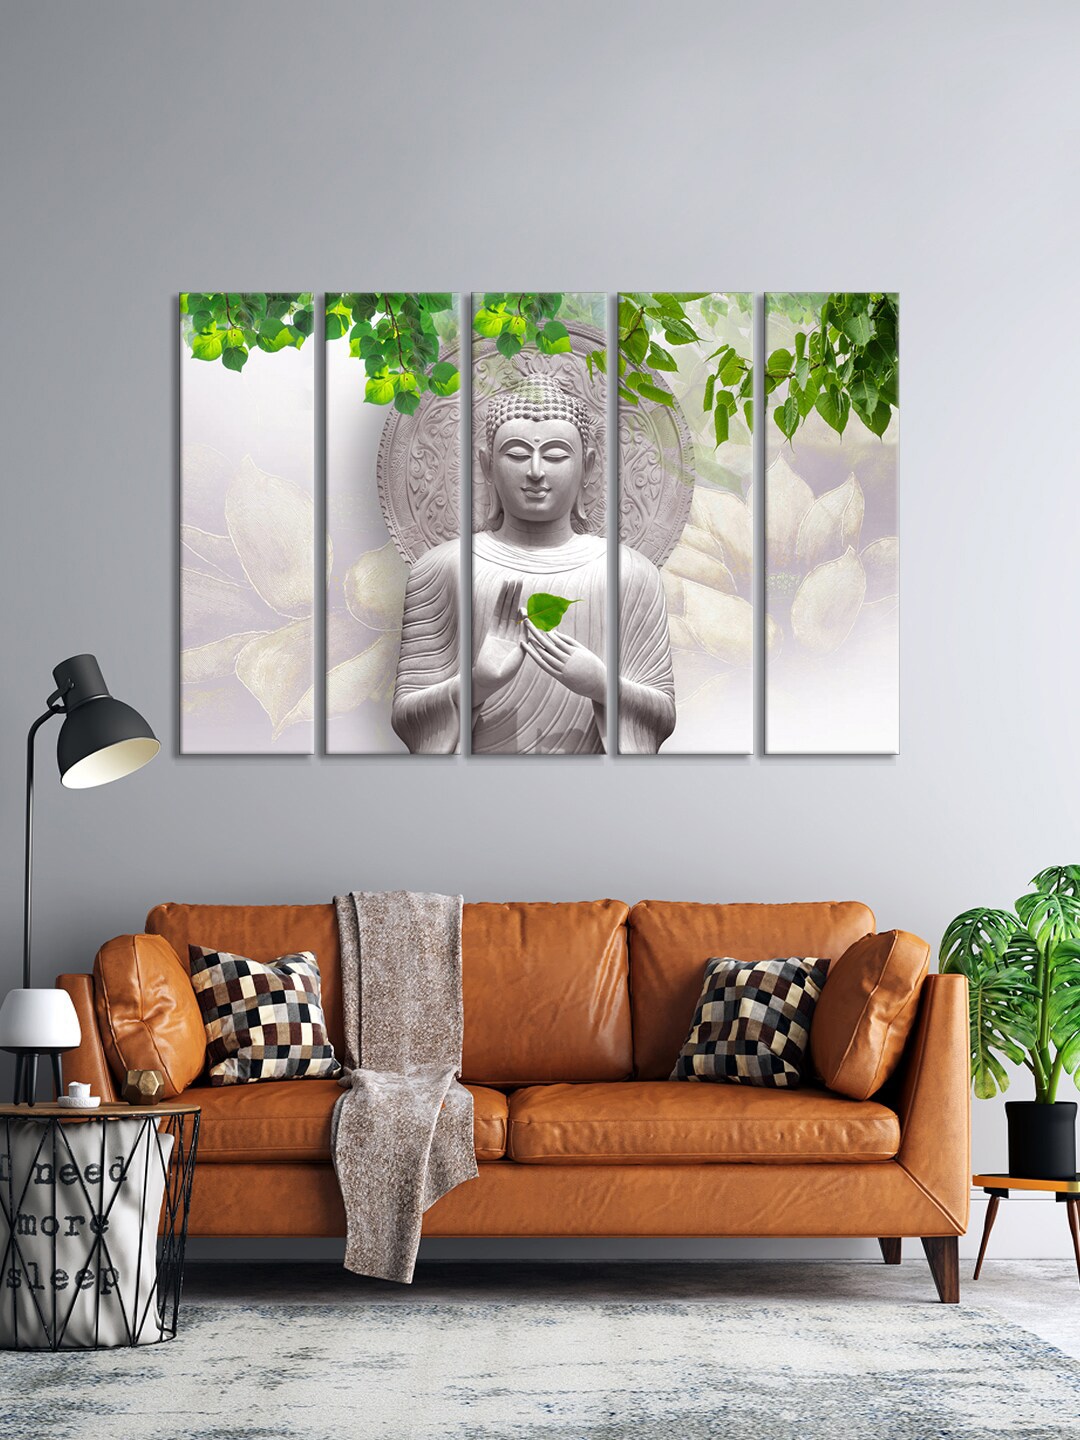 999Store Set Of 5 White & Green The Blessing Buddha Wall Art Frames Price in India